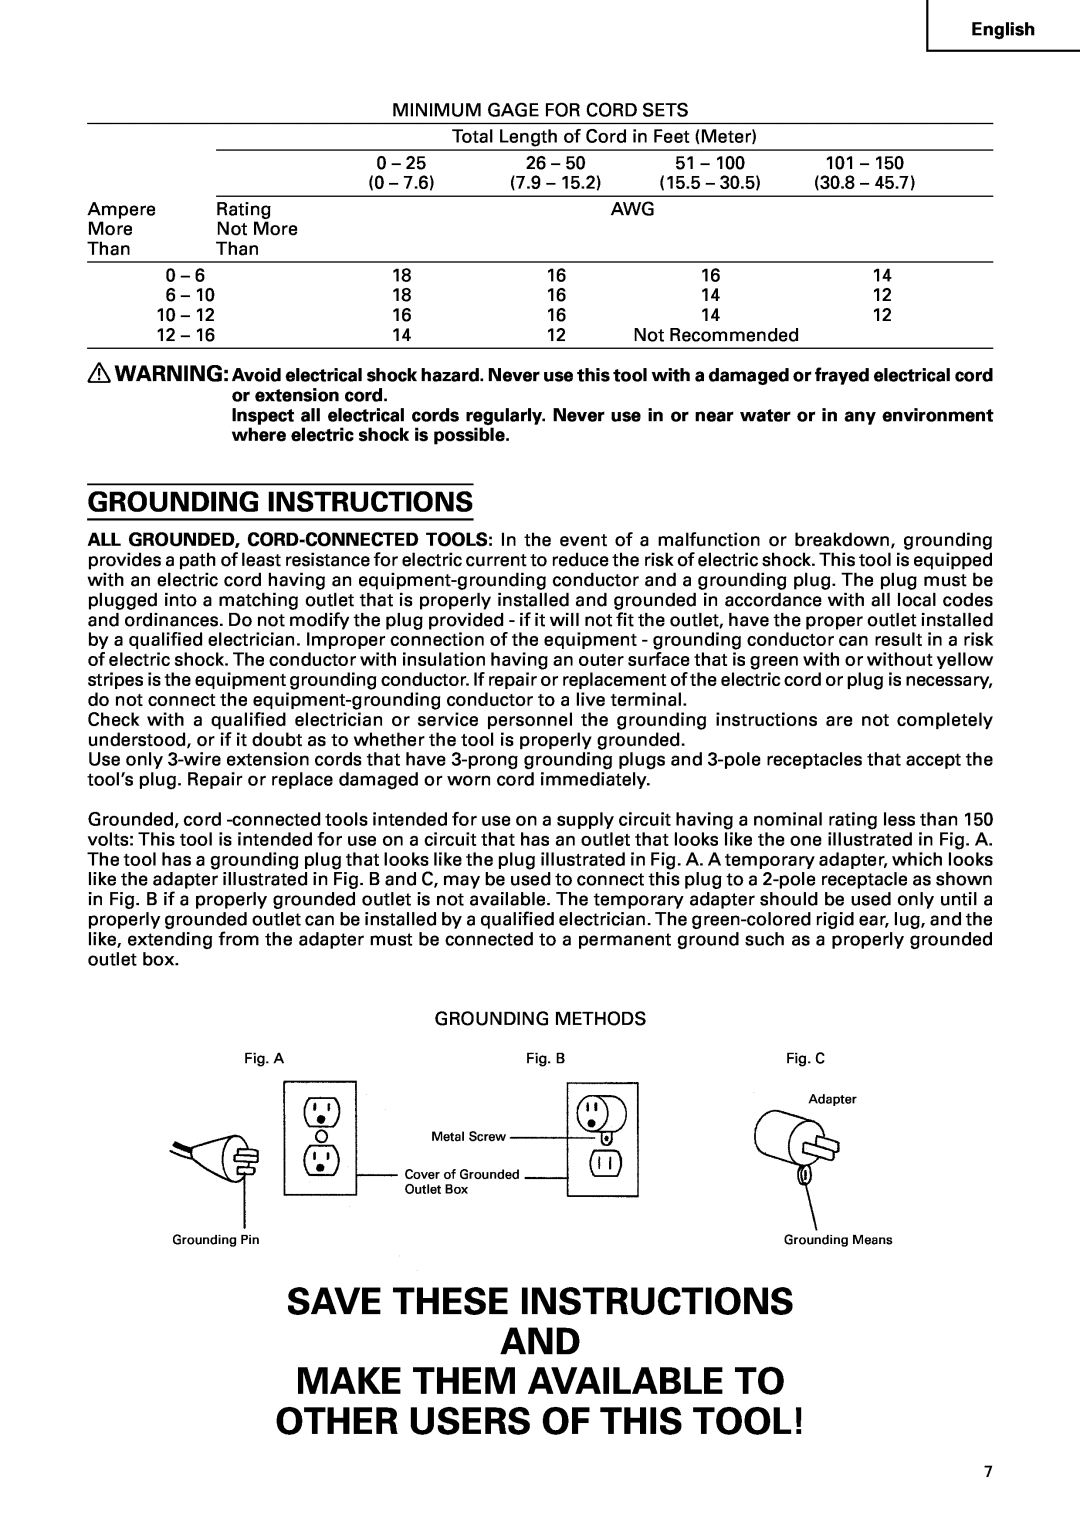 Hitachi C10RA2 Save These Instructions And Make Them Available To, Other Users Of This Tool, Grounding Instructions 